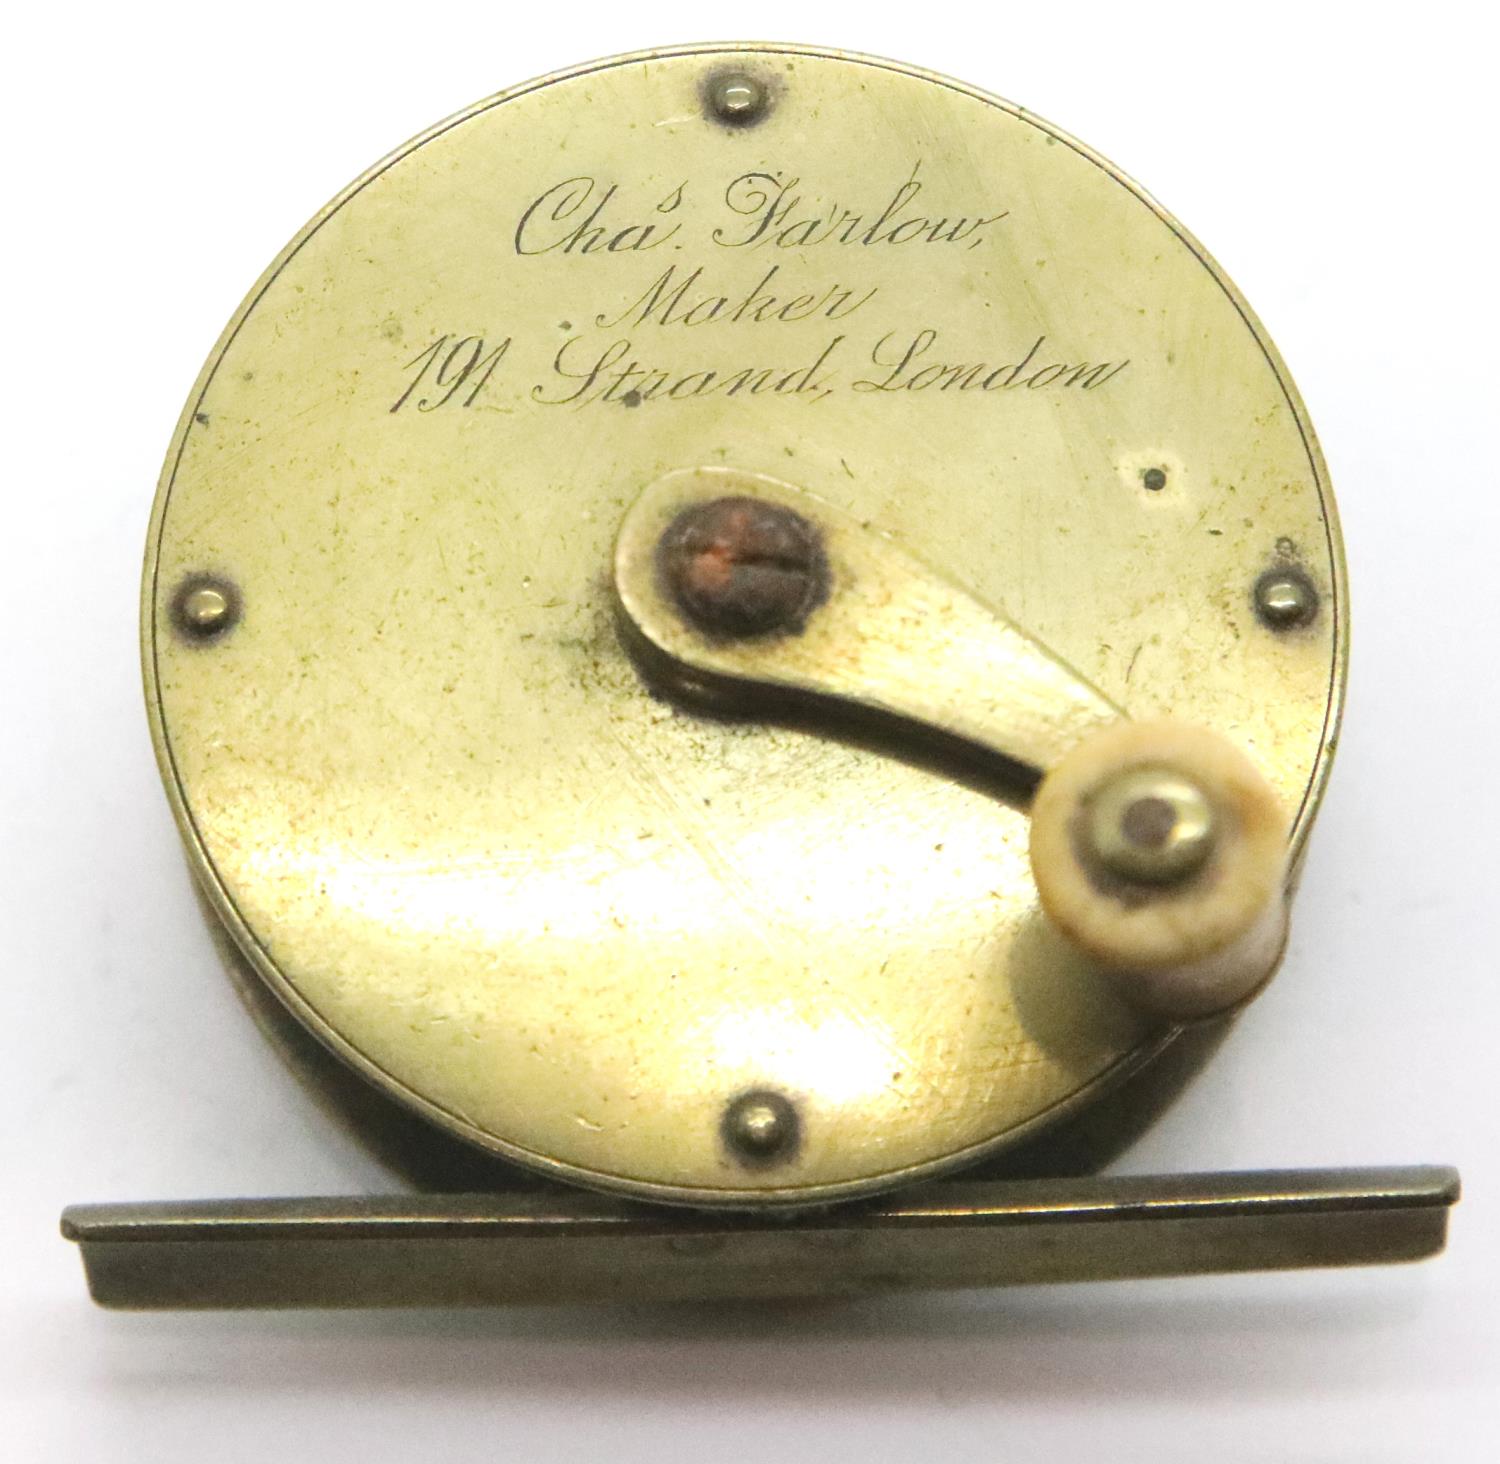 Antique brass fishing reel by Chas Parlour maker 191 Strand, London. P&P Group 2 (£18+VAT for the